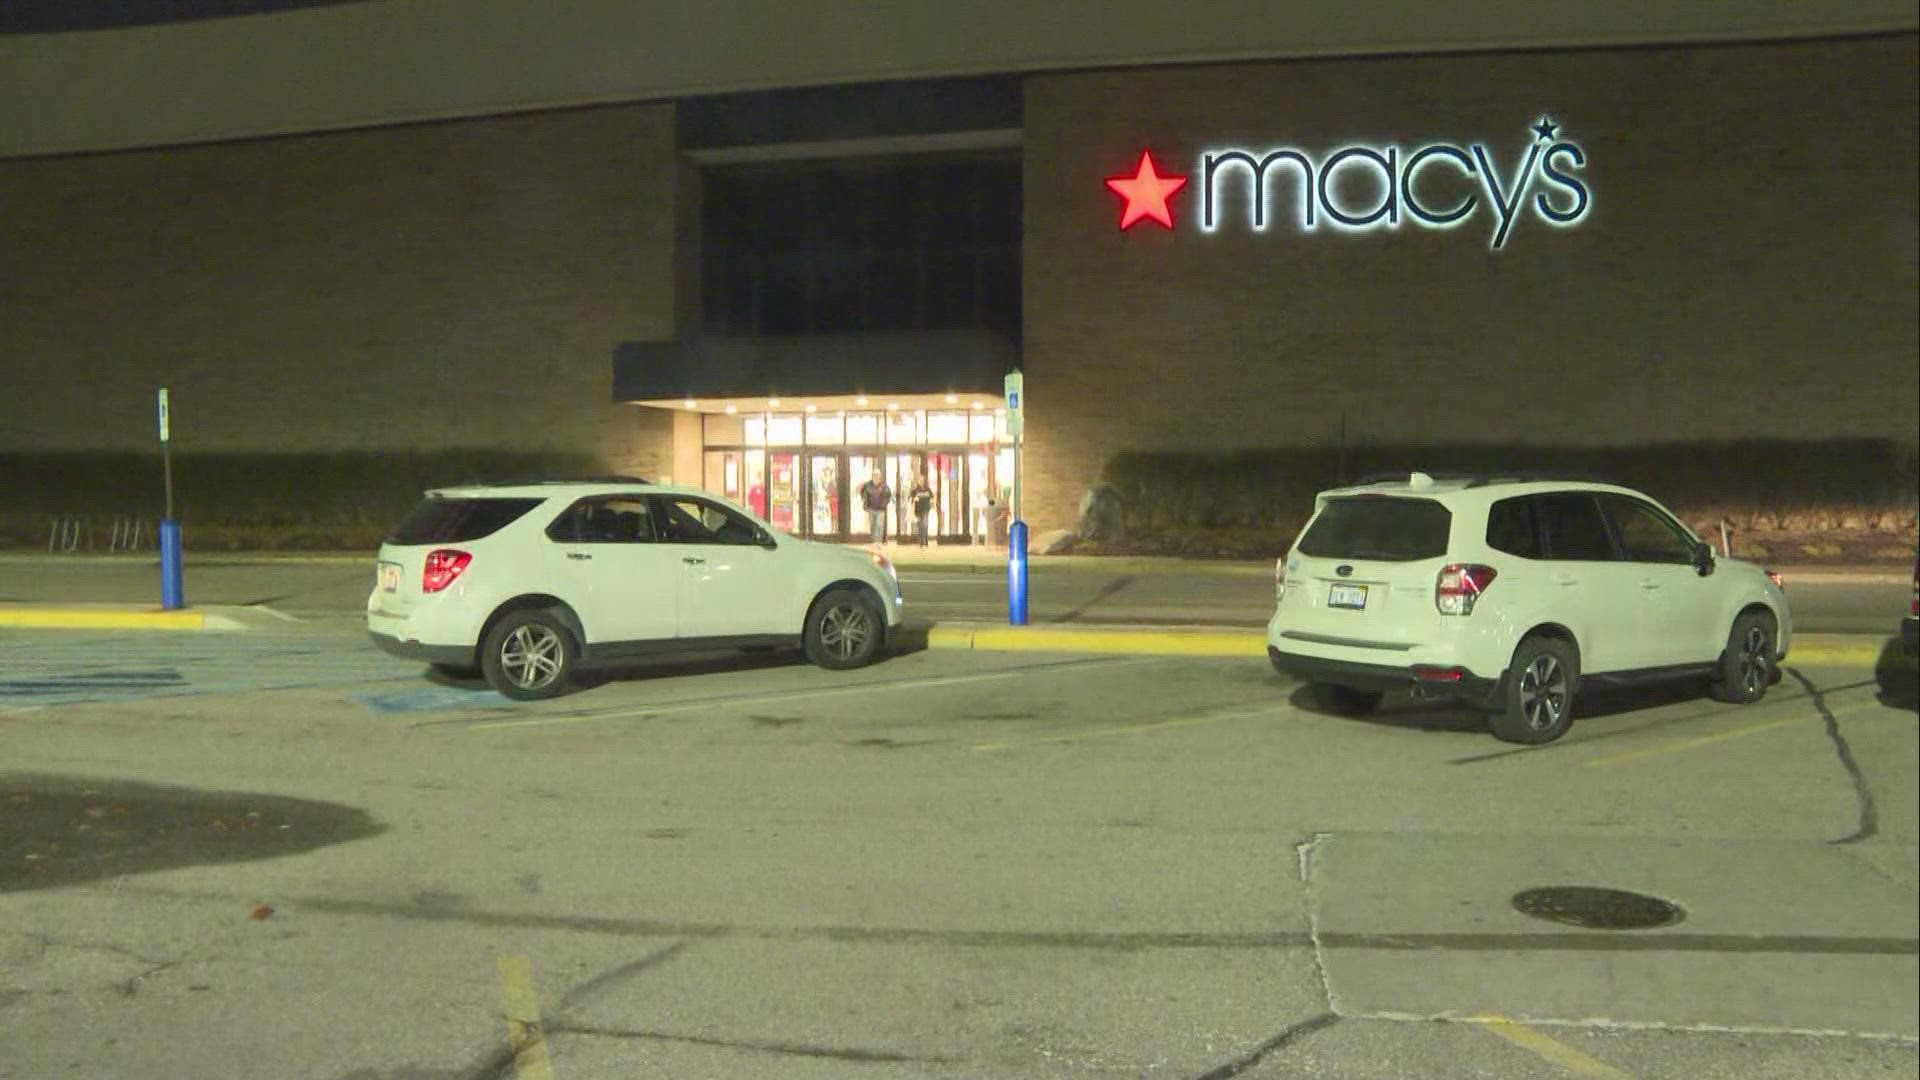 Shoppers across West Michigan are running to the stores early this morning, hoping to snag the best deals on Black Friday.